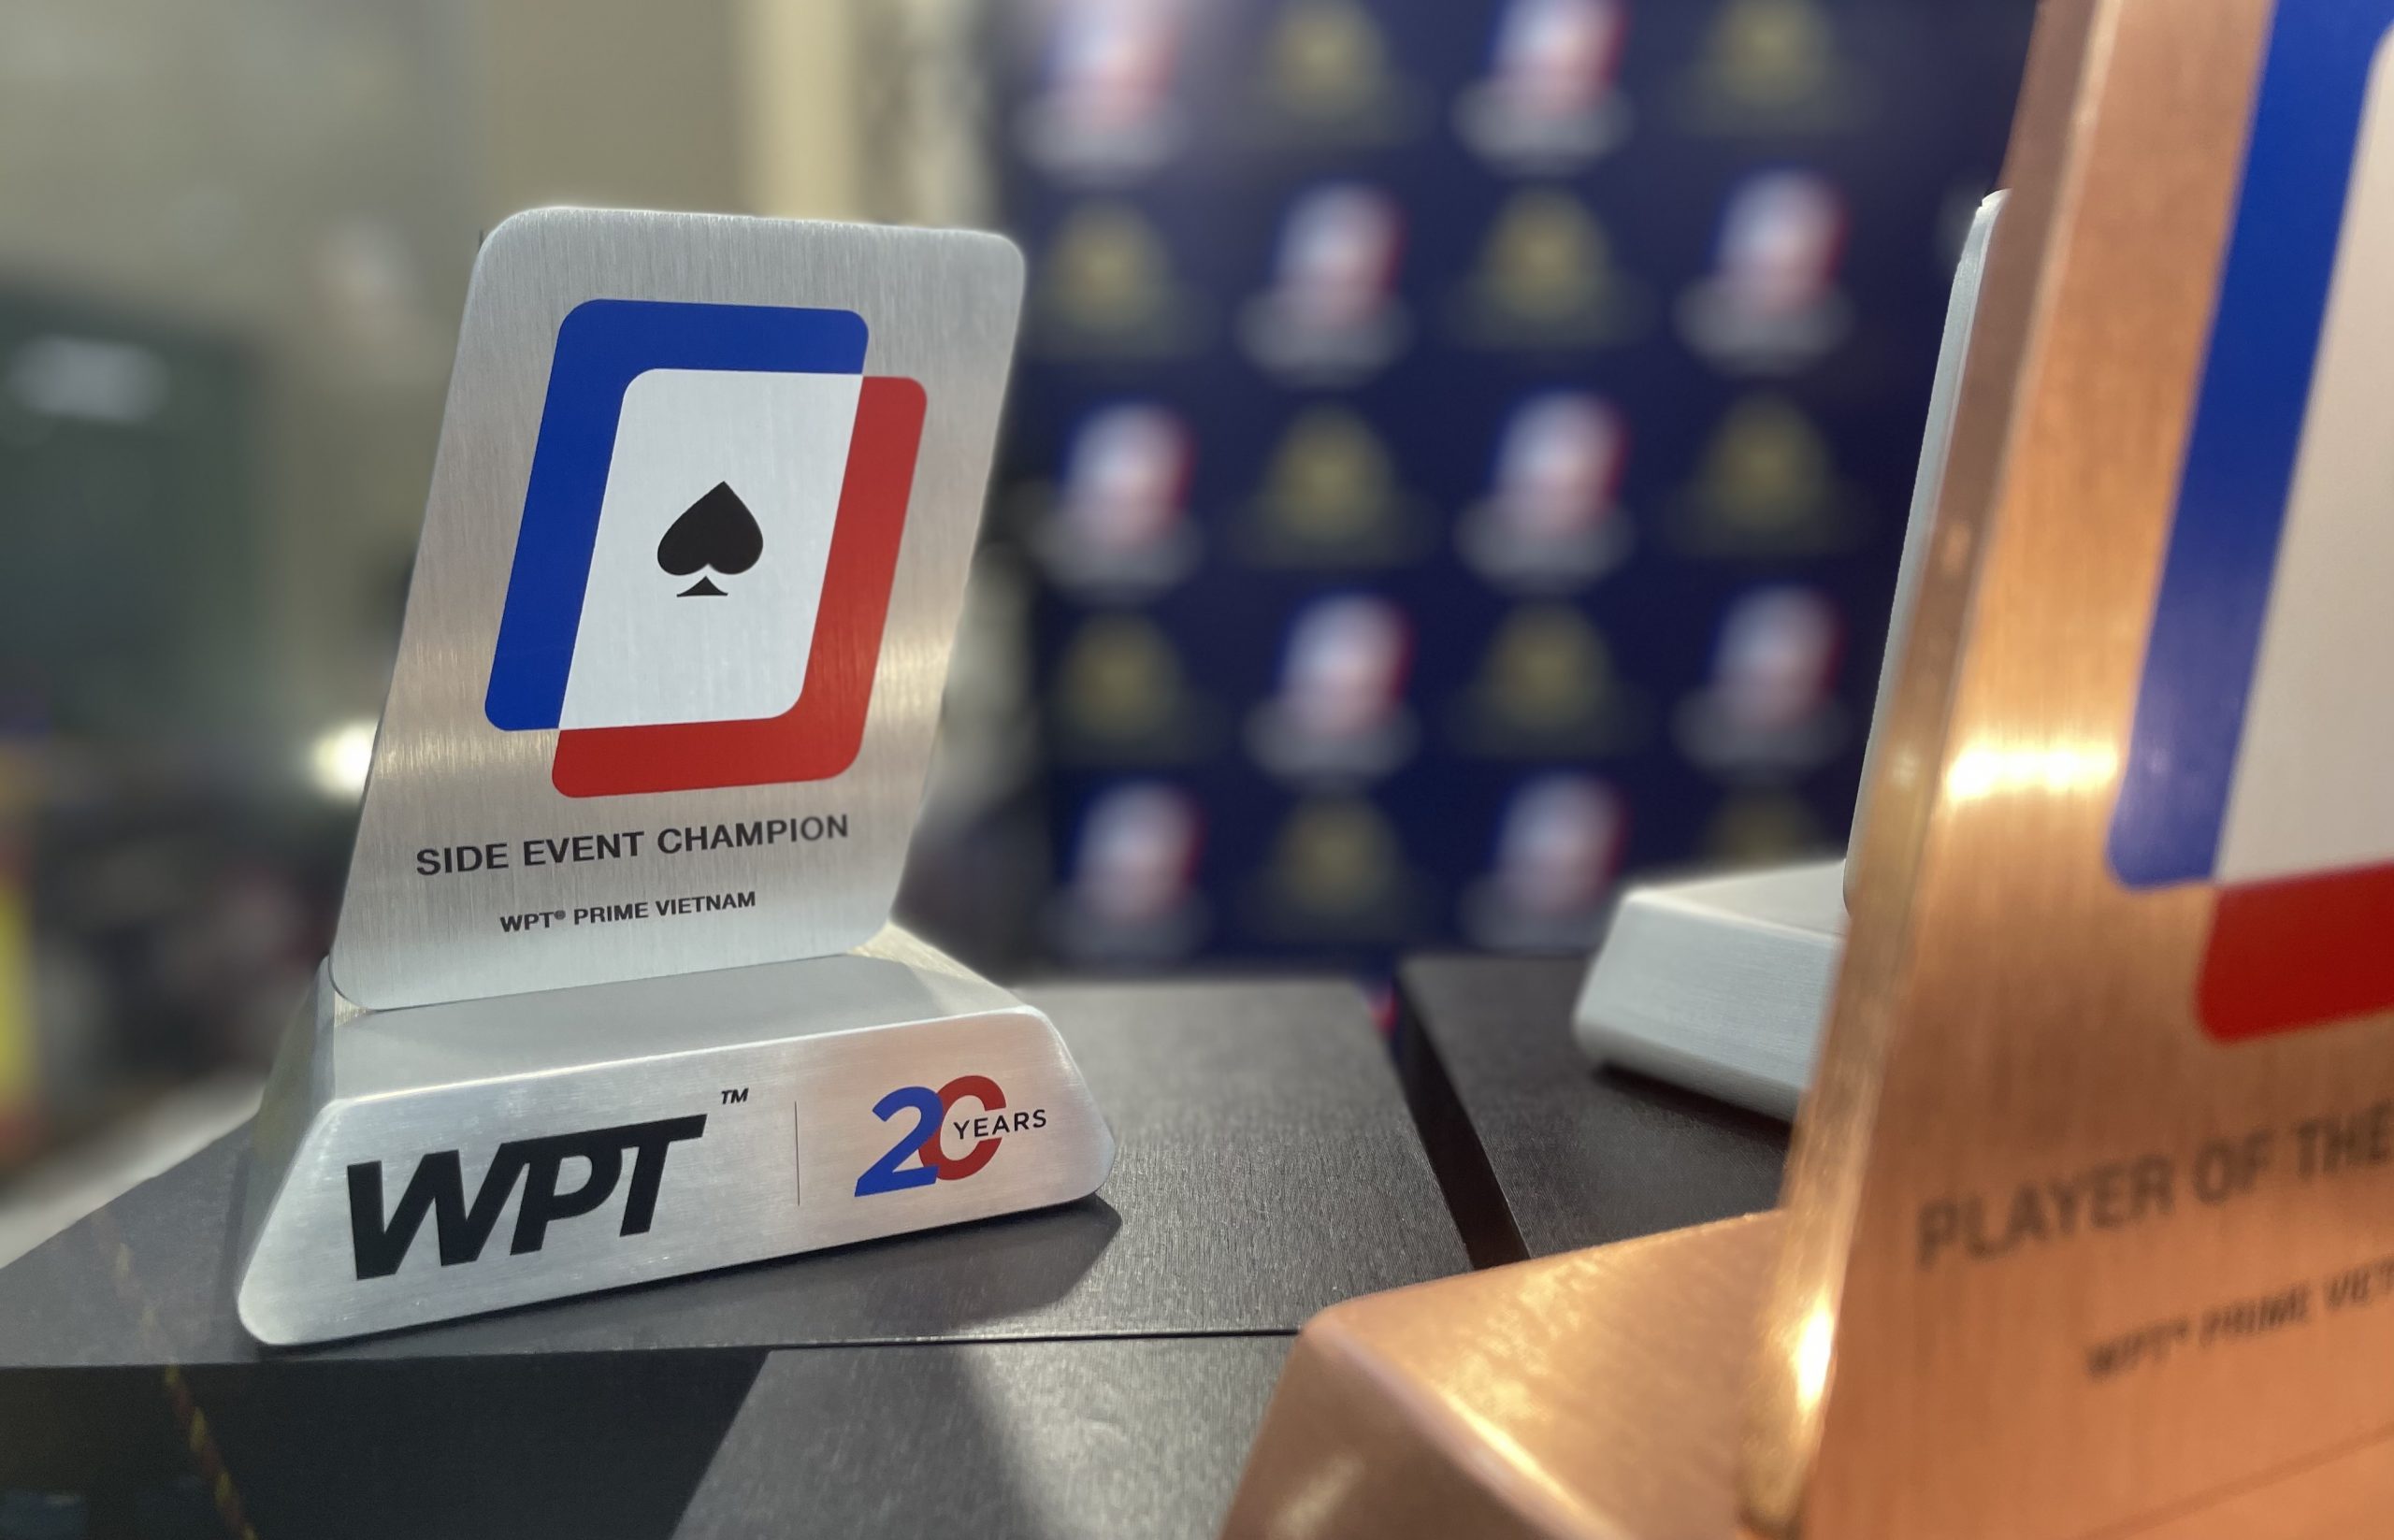 WPT Prime Vietnam: Opener Event Chip Counts, Seat Draw, Payouts